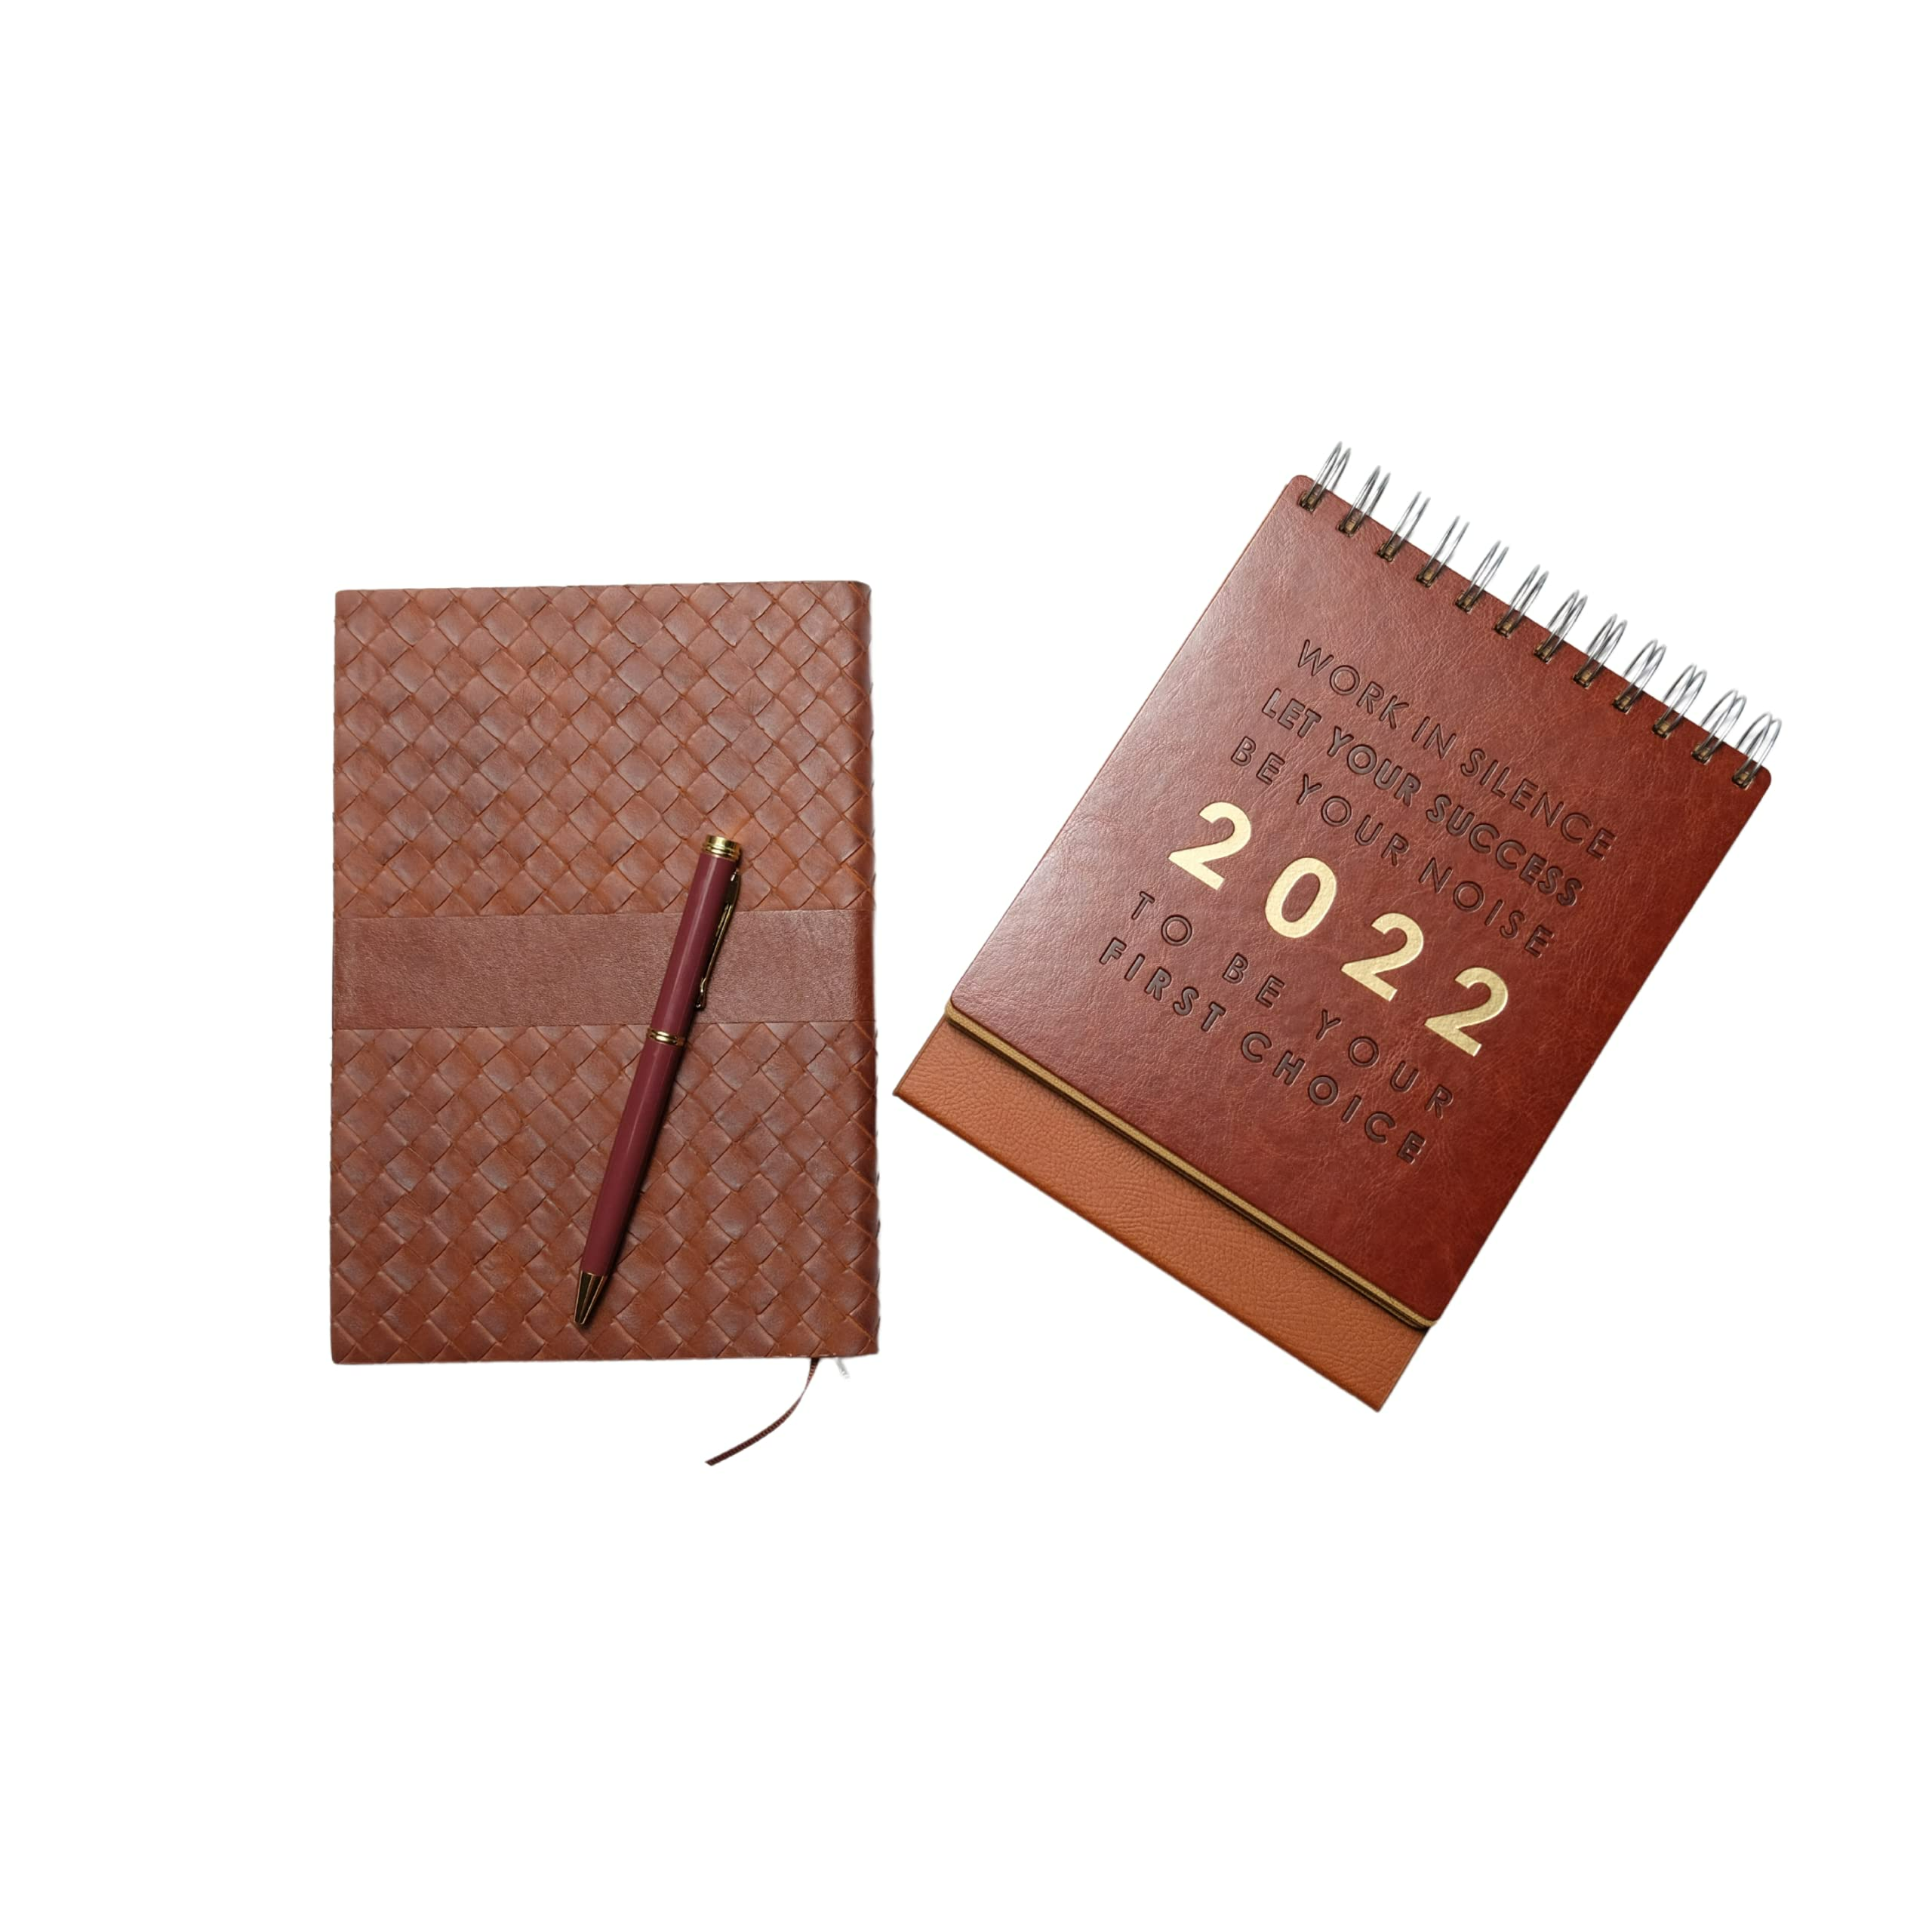 DurmarShana BIBELOT 4-in-1 Leather Combo with Pen, Planner Diary, Diaries, and 2022 Calendar.